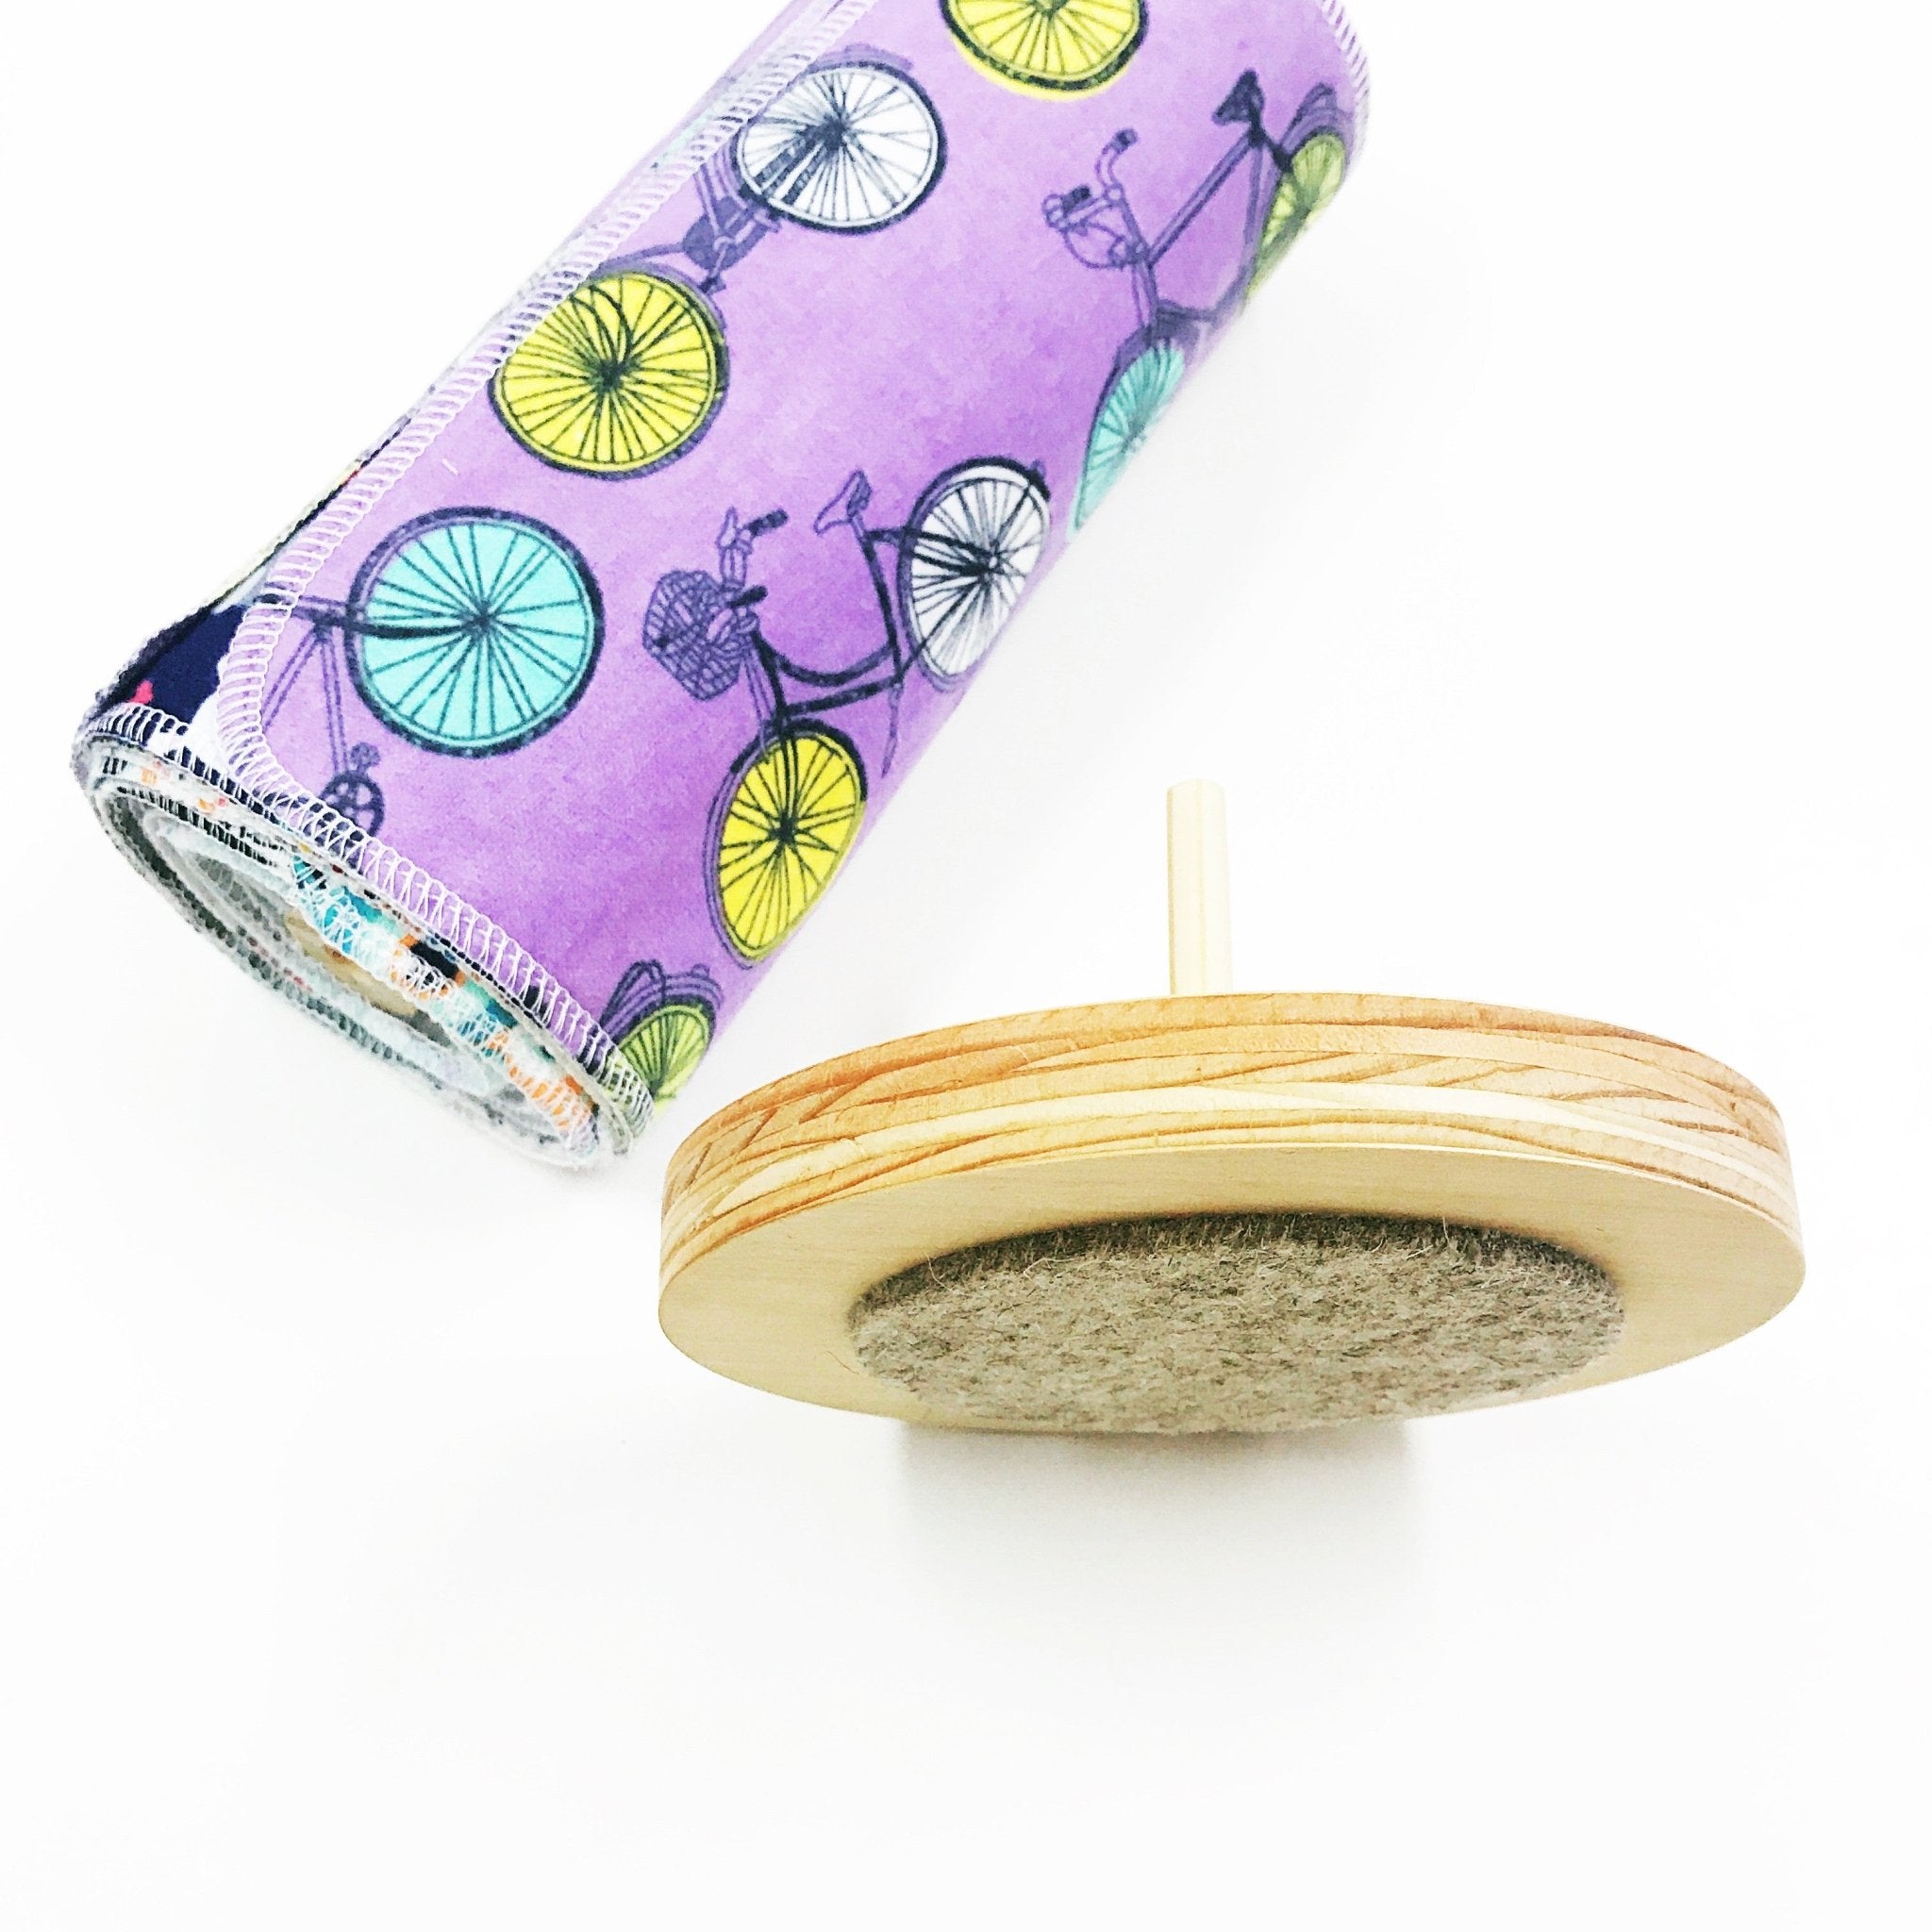 Marley&#39;s Monsters UNpaper® Towels + Wooden Holder image shows removable base with felt counter protector on the bottom